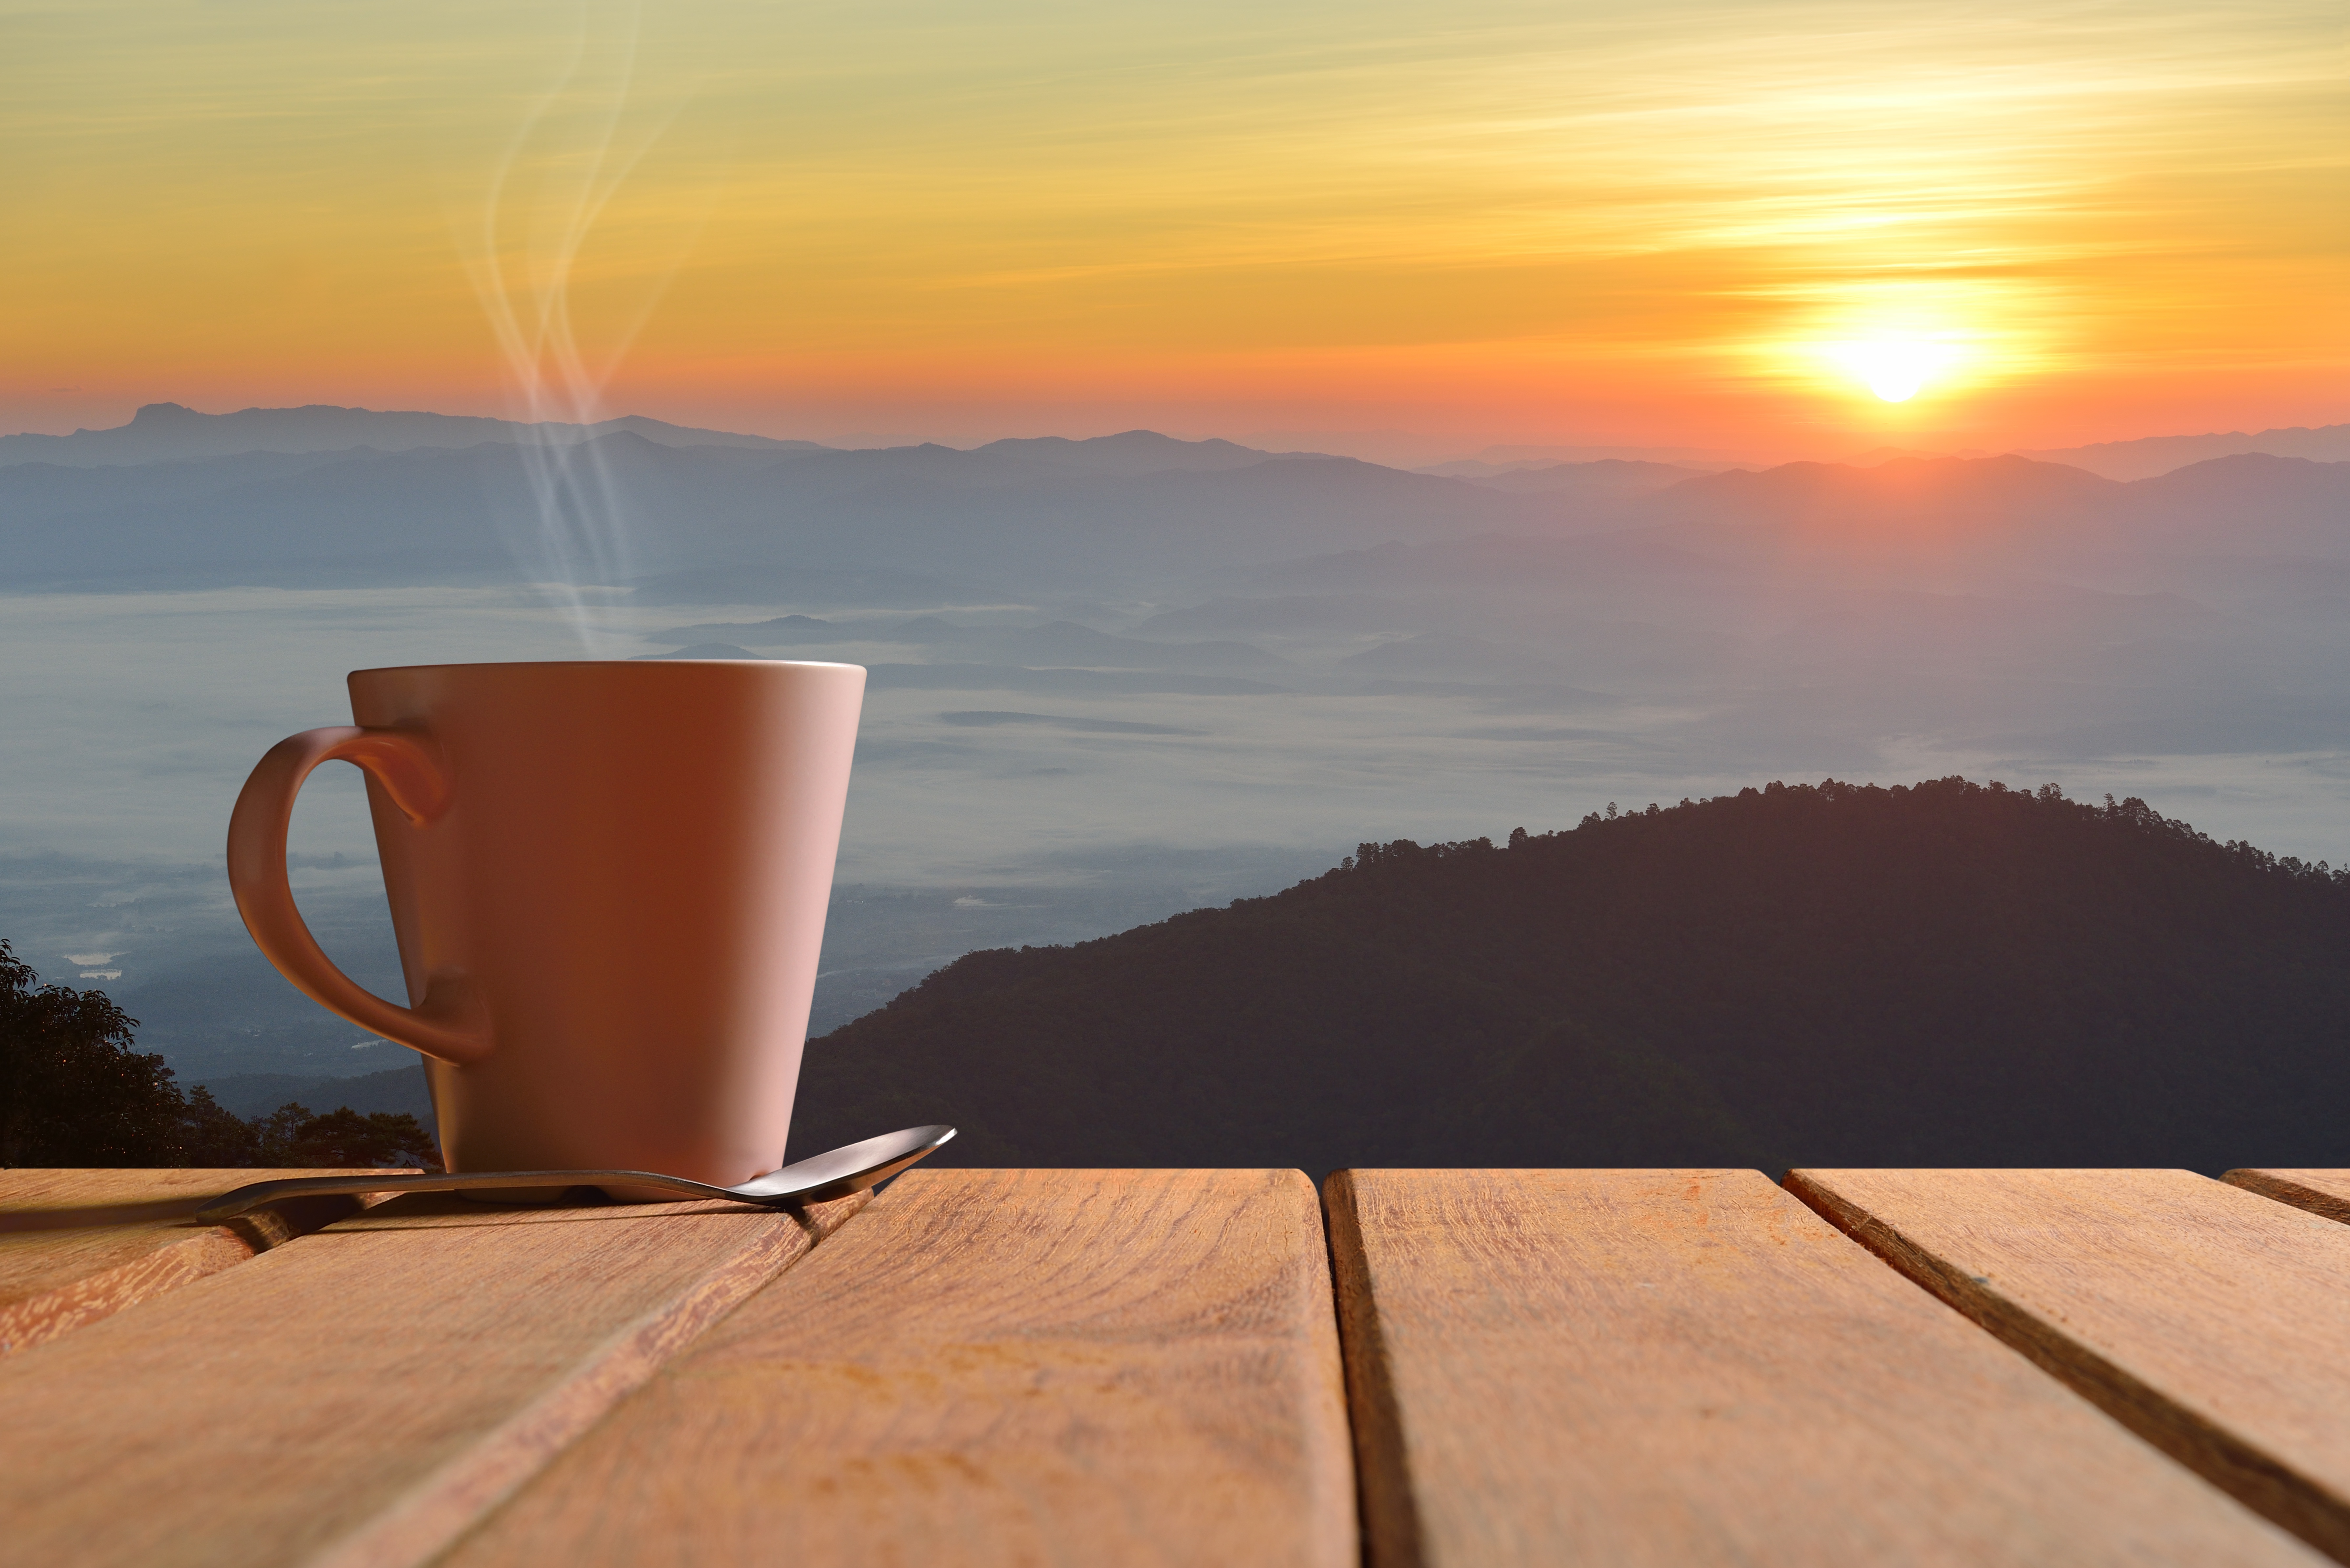  Morning Coffee  HD Photography 4k Wallpapers Images 